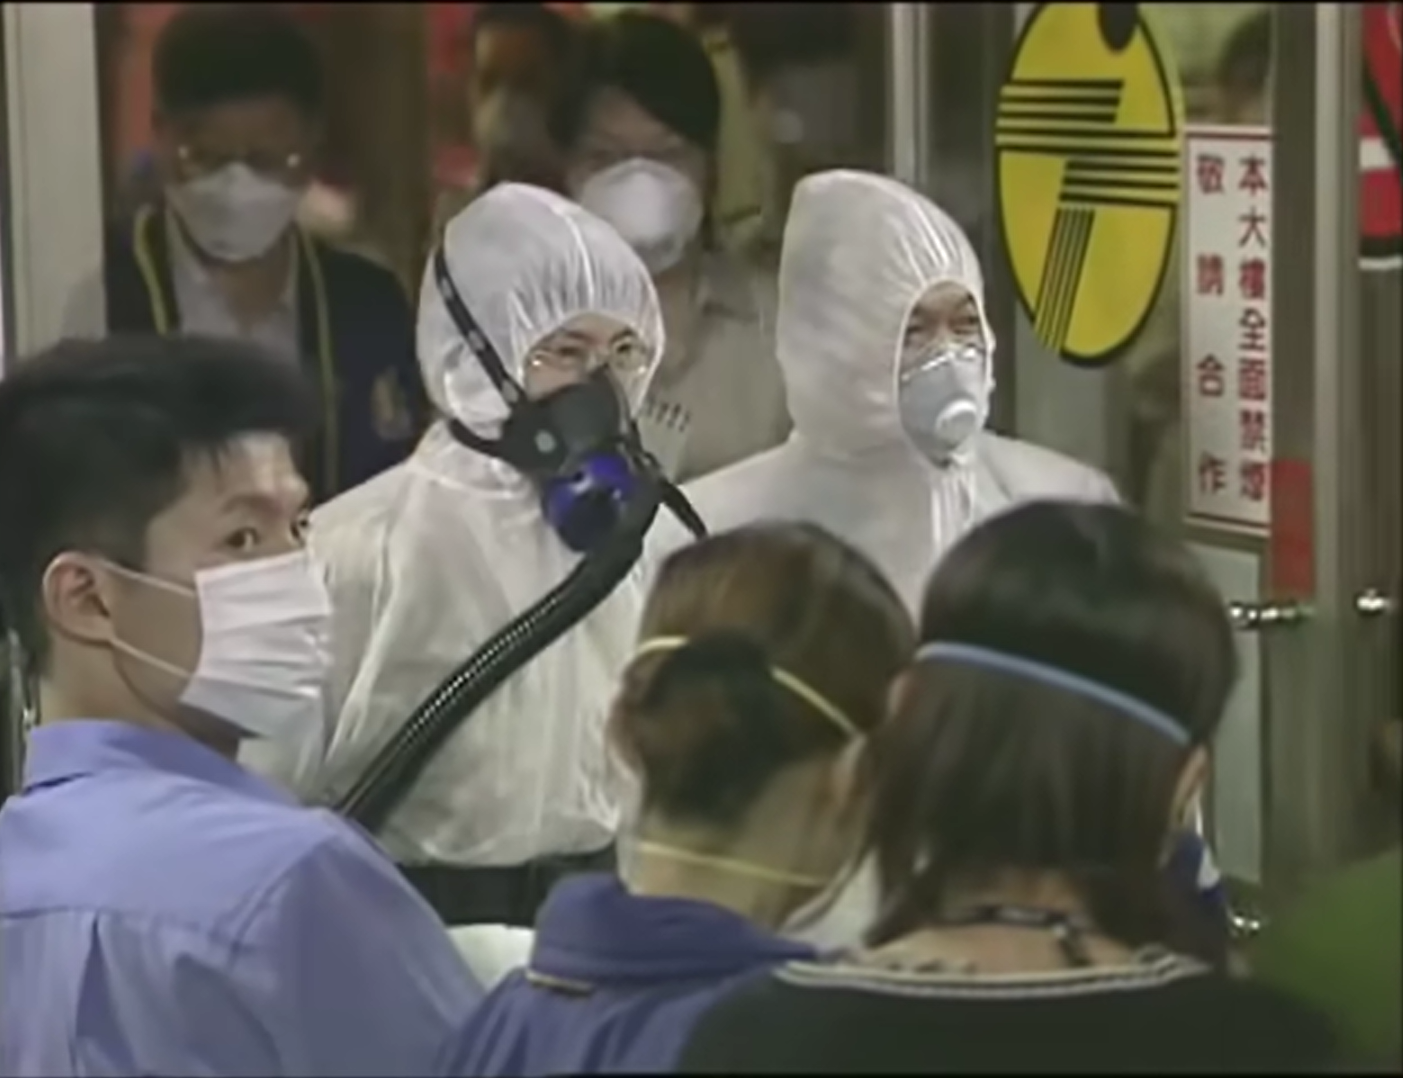 Qiu Shuti was the Director of Health for the City of Taipei during the SARS epidemic 17 years ago and one of the decision makers of the 